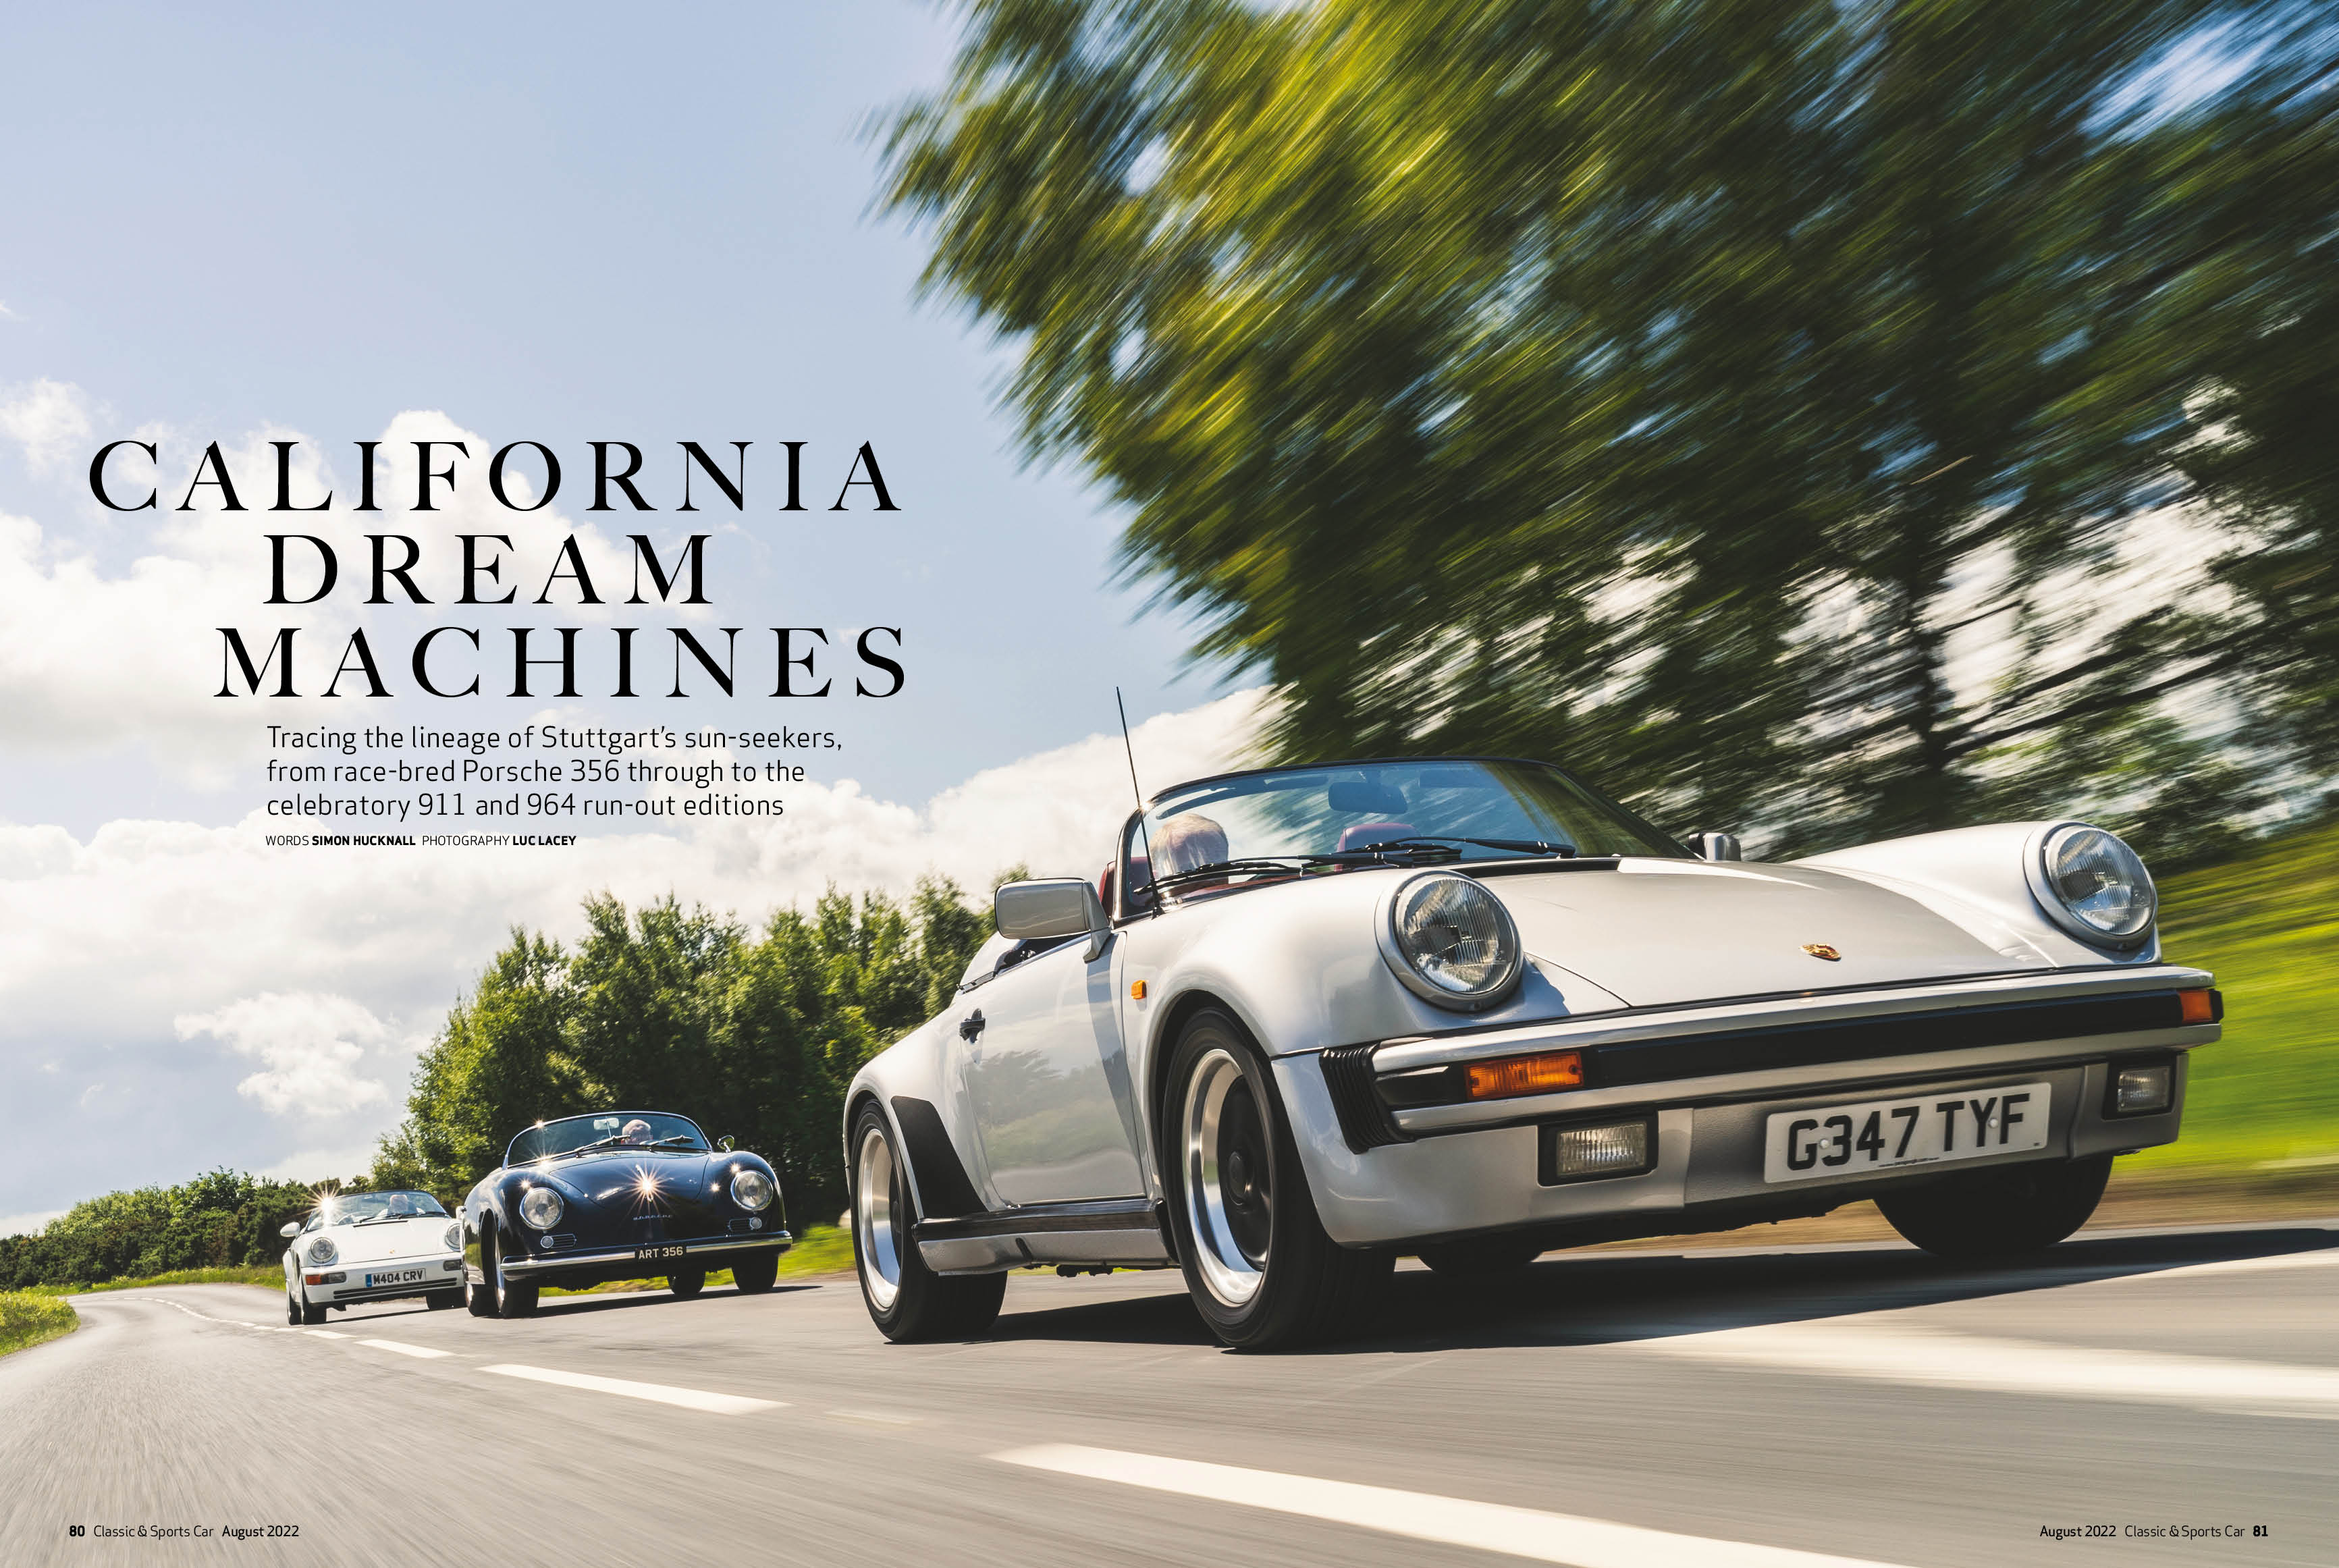 Classic & Sports Car – Porsche Speedsters: inside the August 2022 issue of Classic & Sports Car